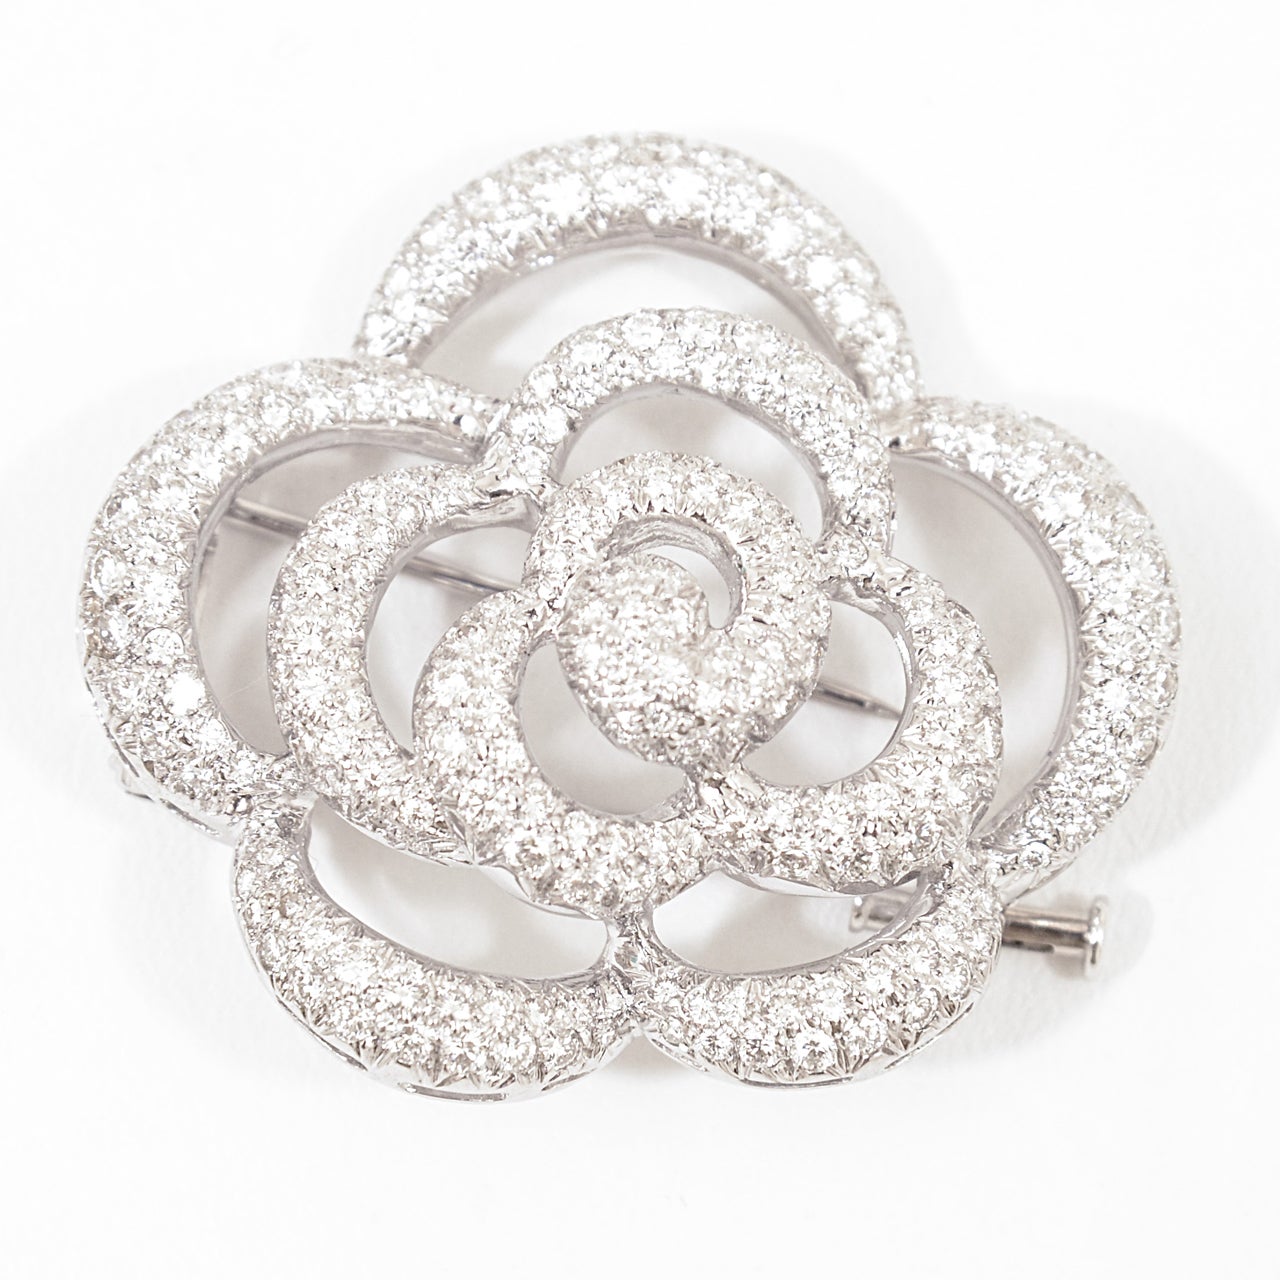 A beautiful Van Cleef & Arpels Flower Brooch in 18k gold and tapered bombé petals pavé set containing 243 stones  H-I / VS quality diamonds